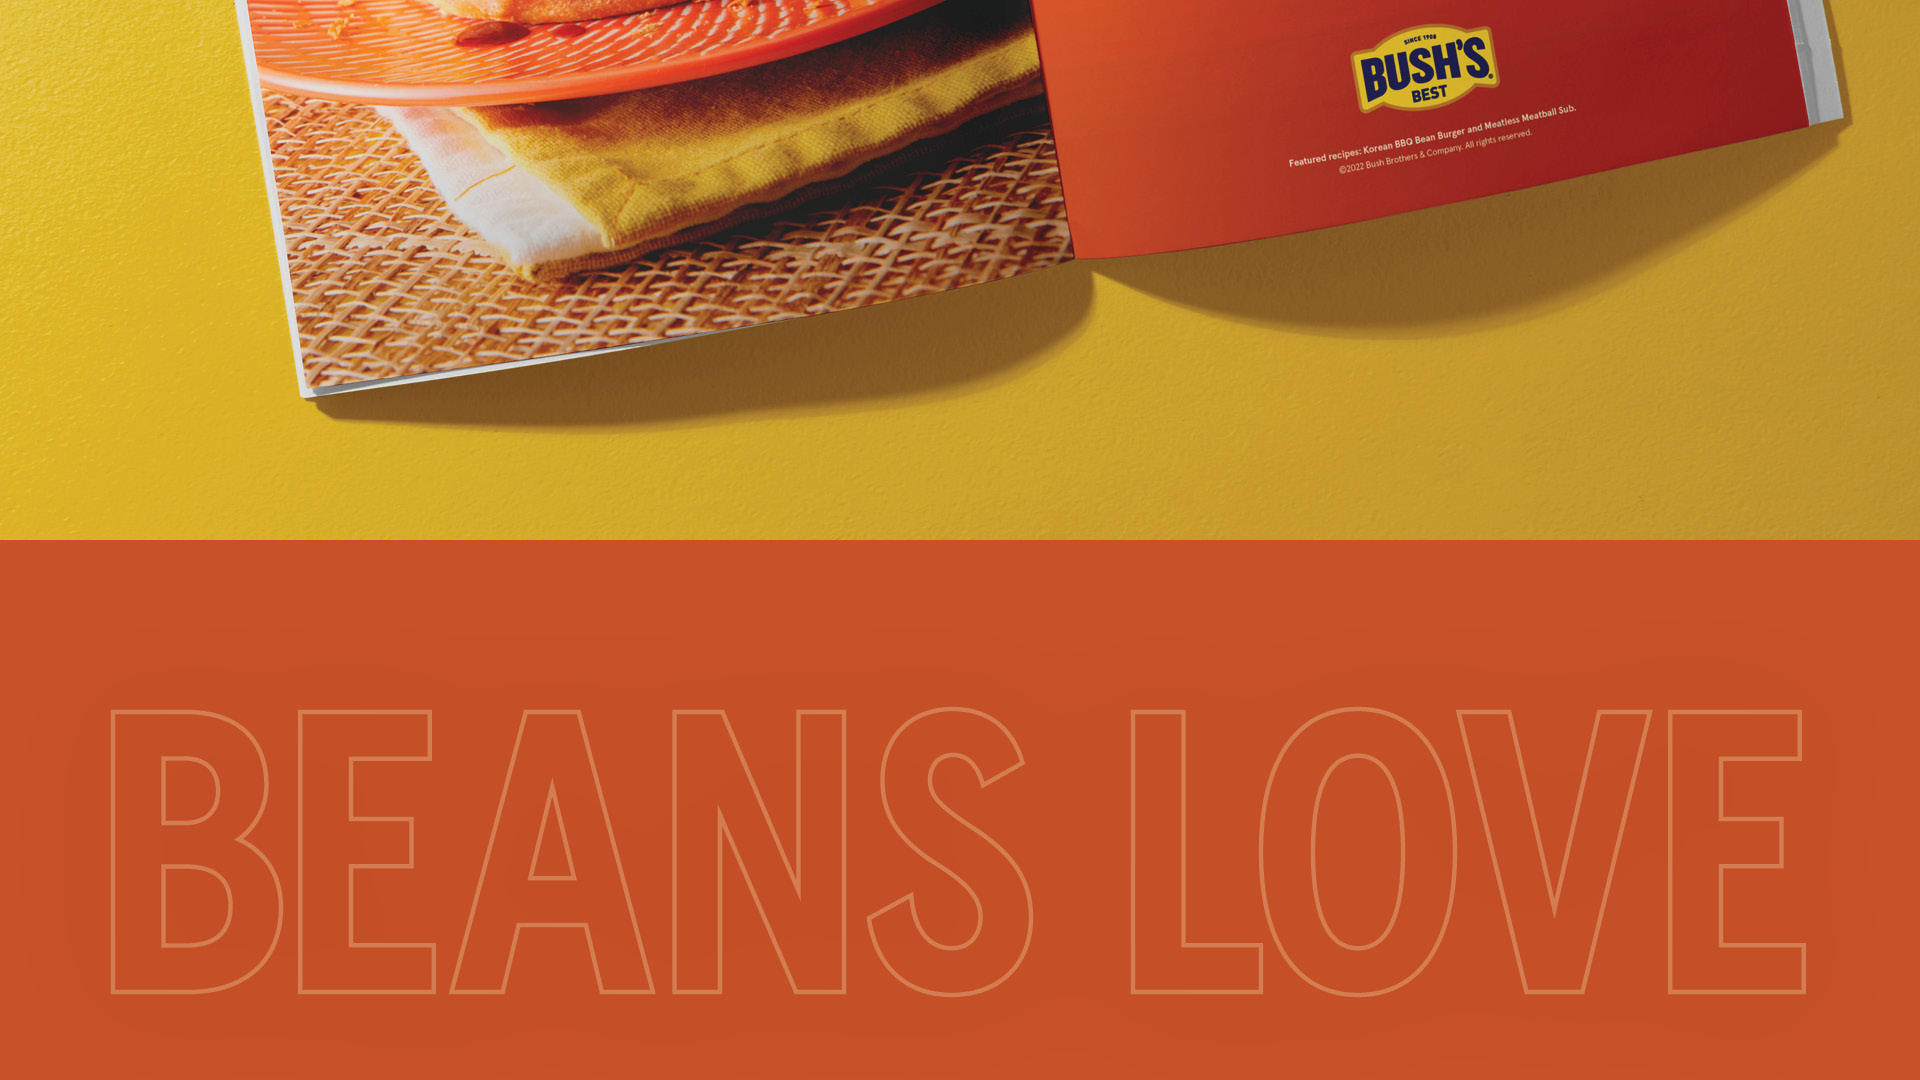 Beans love graphic type treatment in yellow on an orange background.